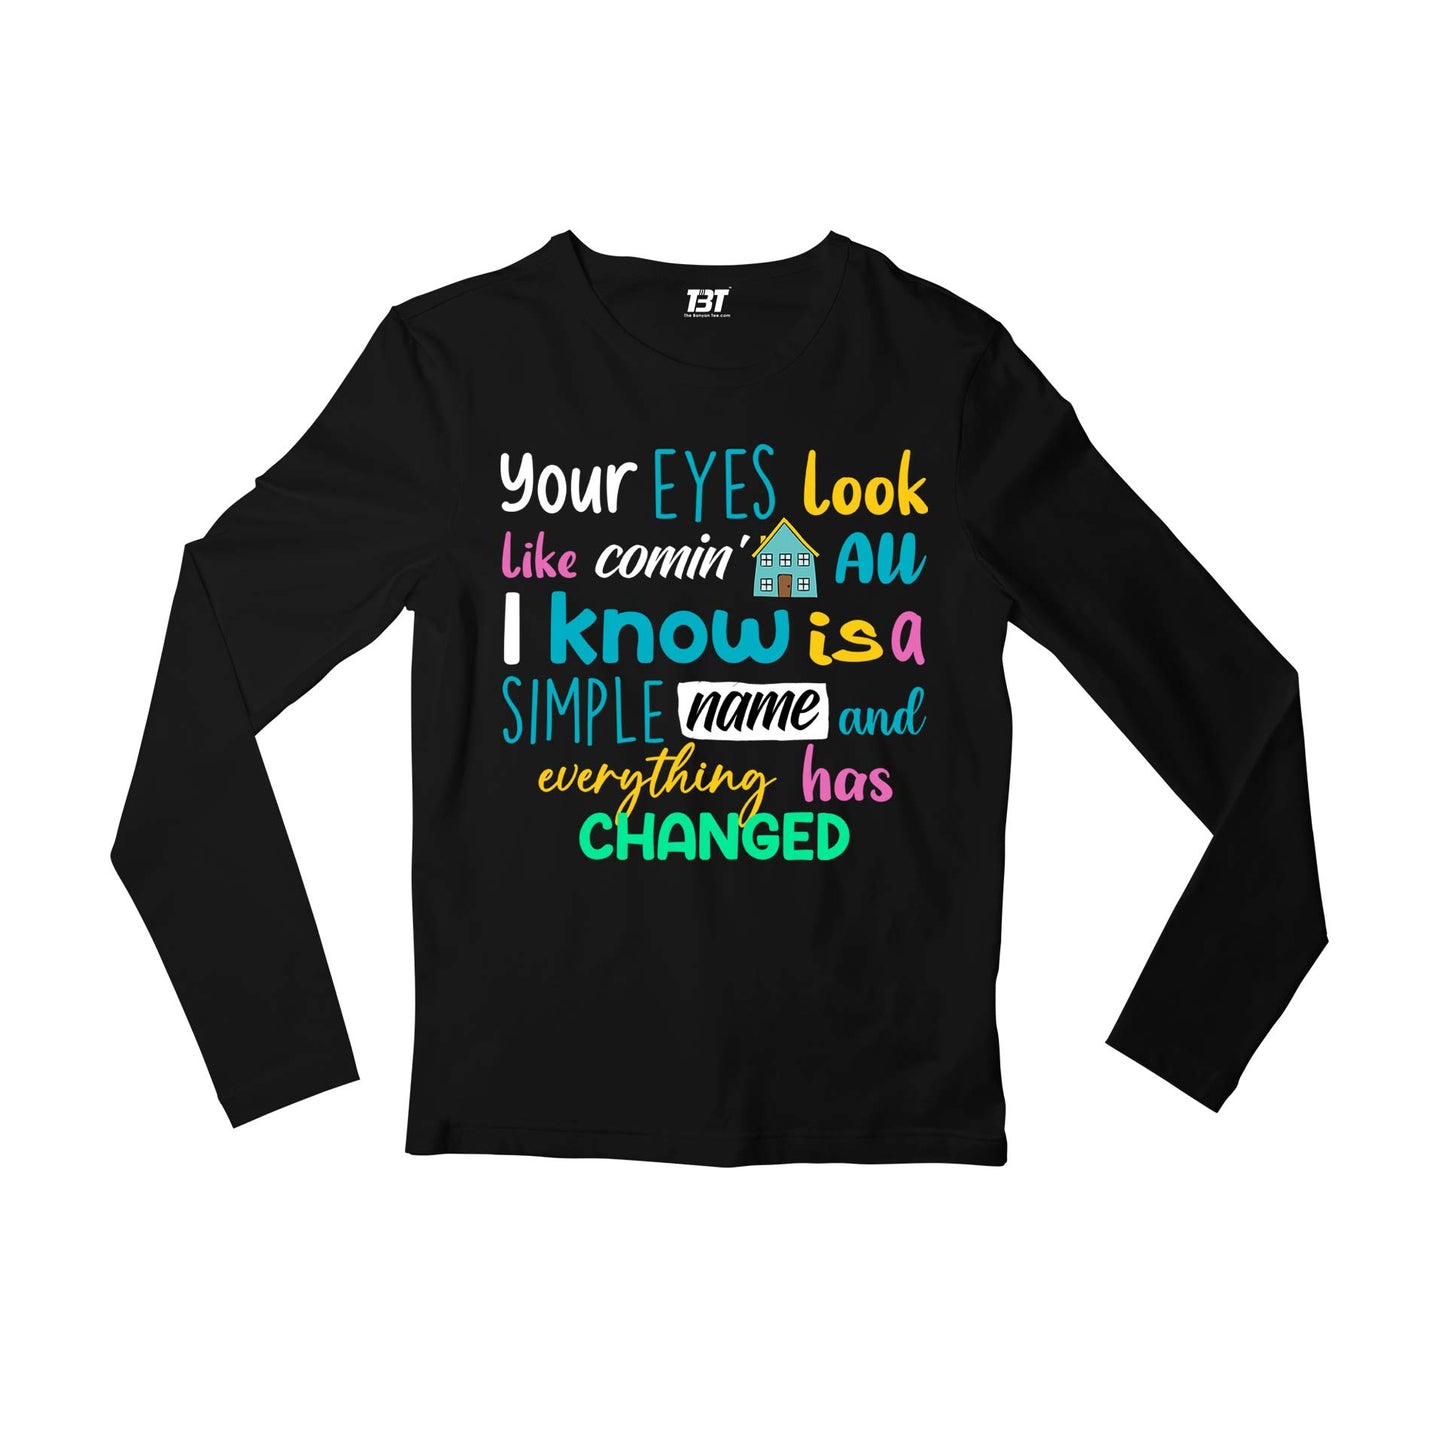 taylor swift everything has changed full sleeves long sleeves music band buy online india the banyan tee tbt men women girls boys unisex black